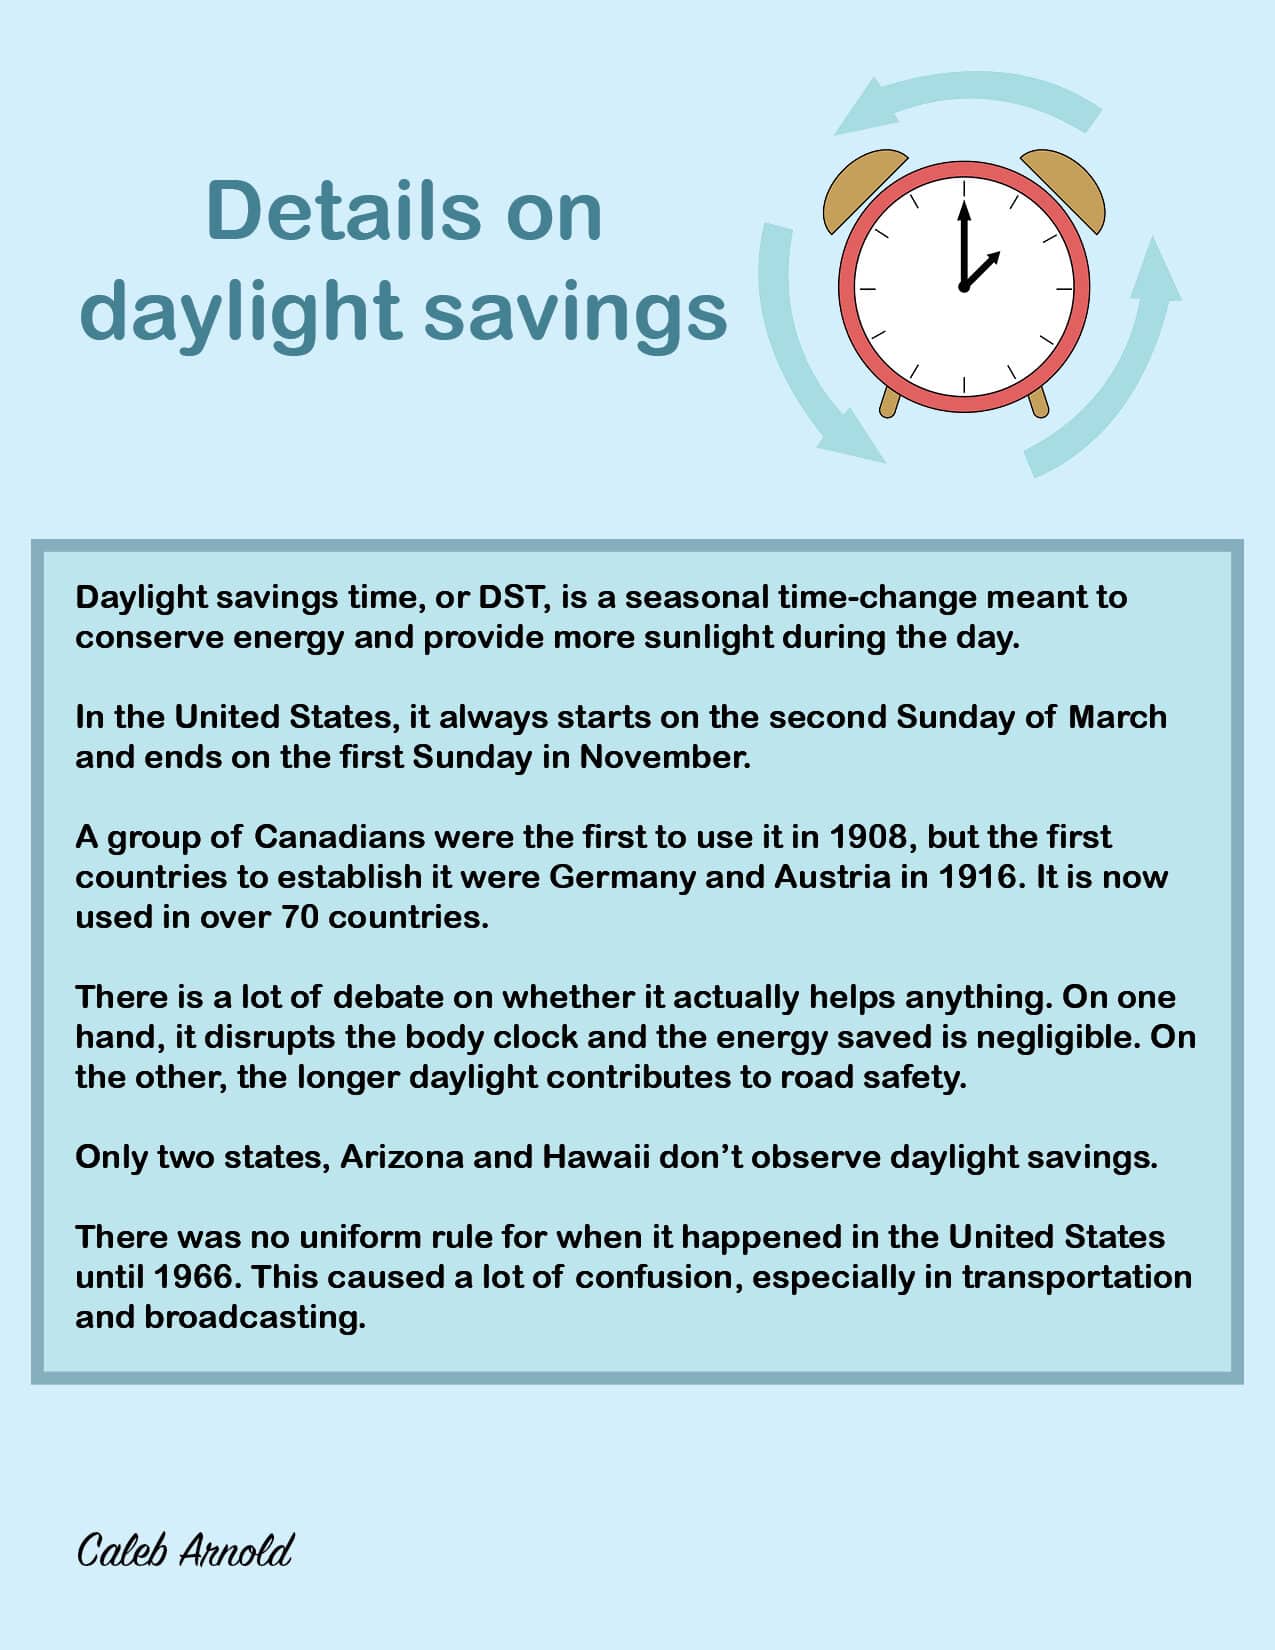 Daylight savings time started on March 8, this year. Read up on some of the history and details of DST.Source: timeanddate.com